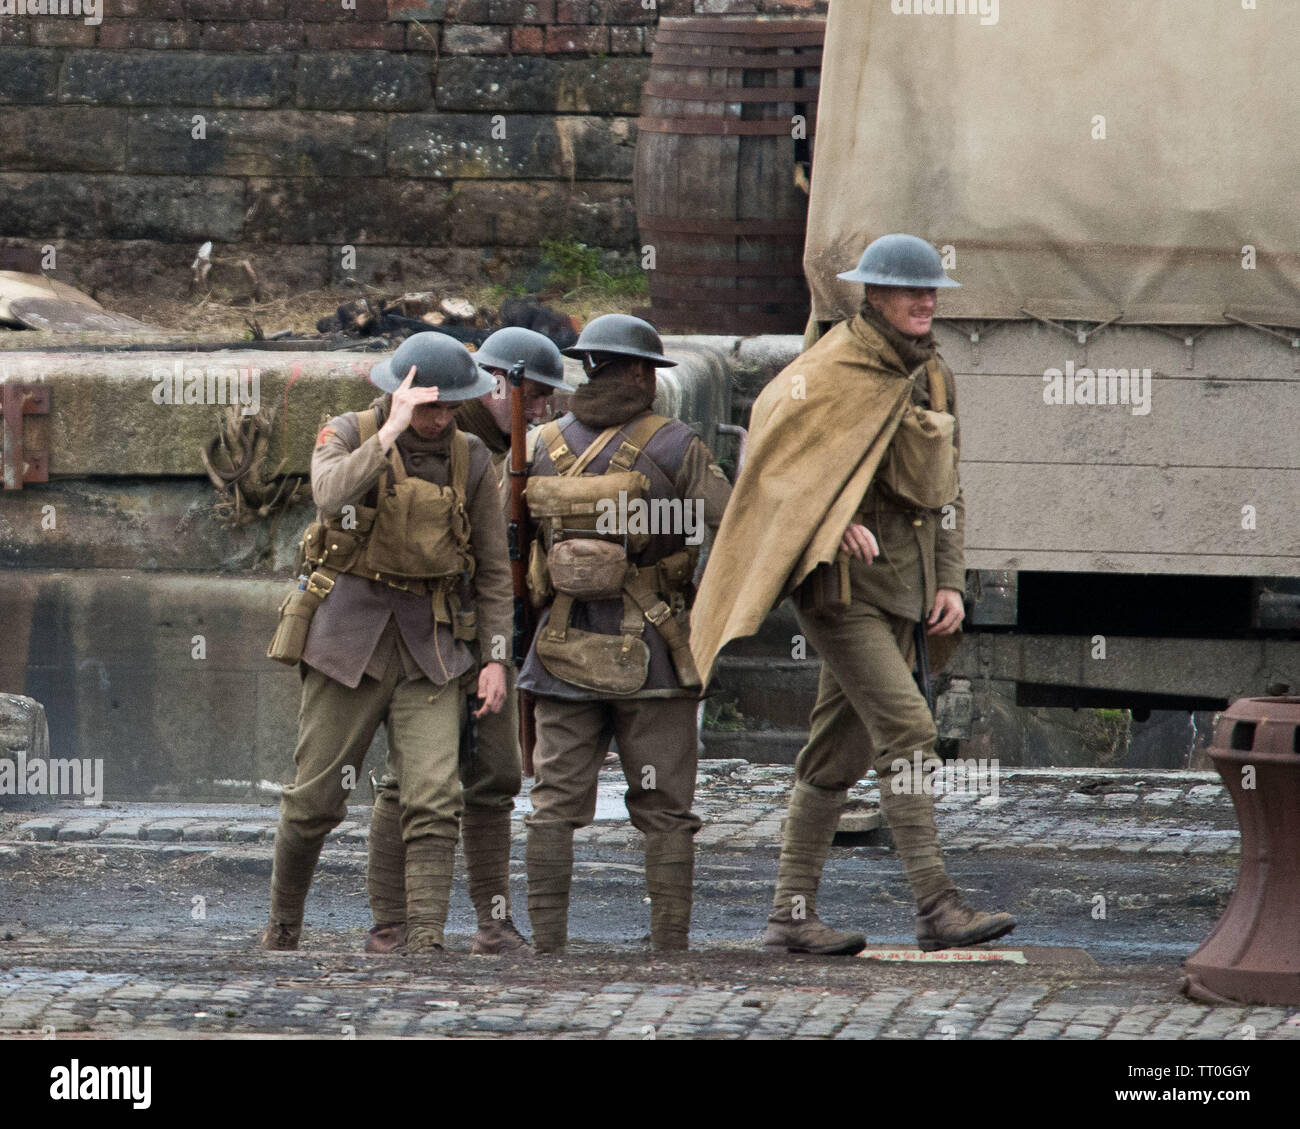 Glasgow, UK. 12 June 2019.   The film, called, 1917, is a collaboration between Spielberg and Sam Mendes, who is writing and directing the project.  Mendes is also known for his work on the James Bond films Skyfall and Spectre. Stock Photo